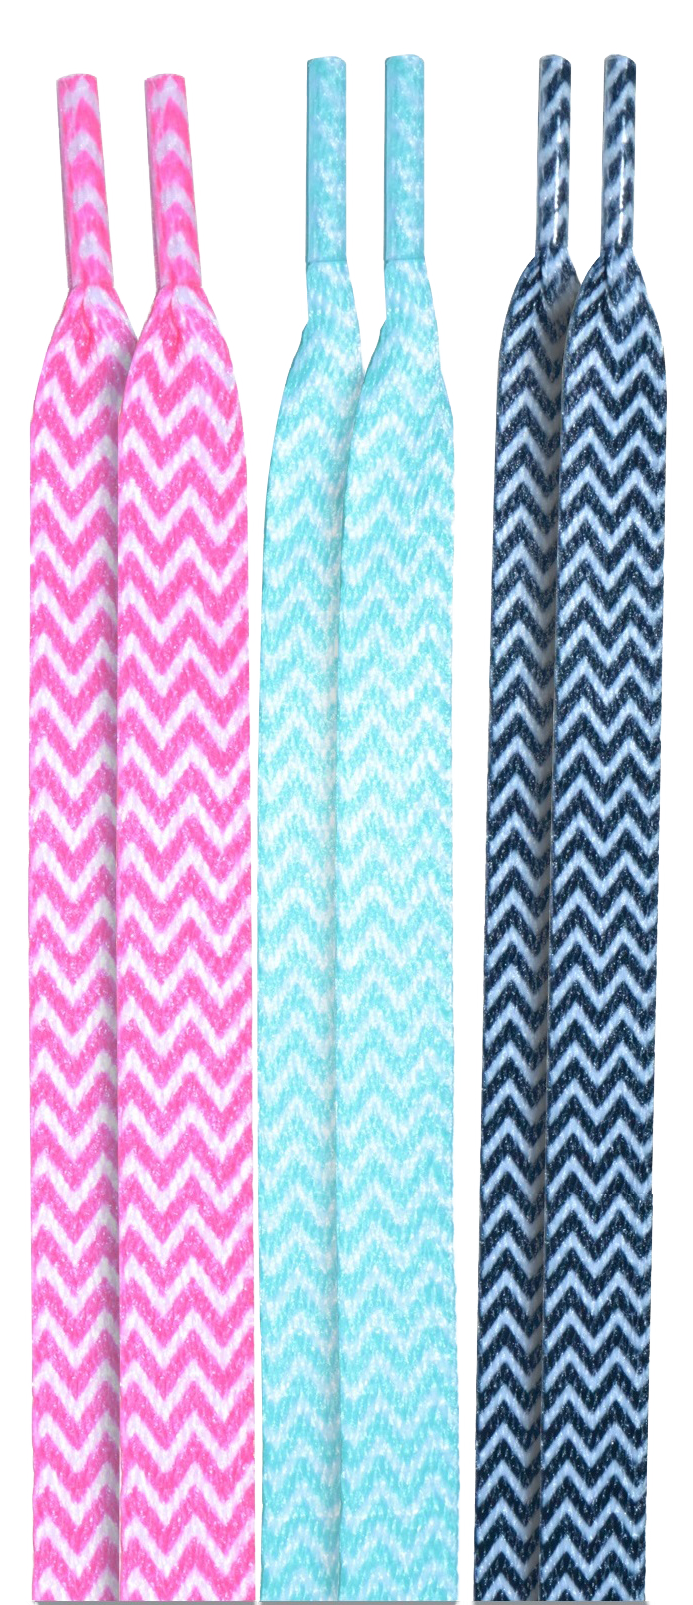 10 Seconds ® Athletic Flat Laces | Pink/Teal/Black Chevron Printed - 3 Pack